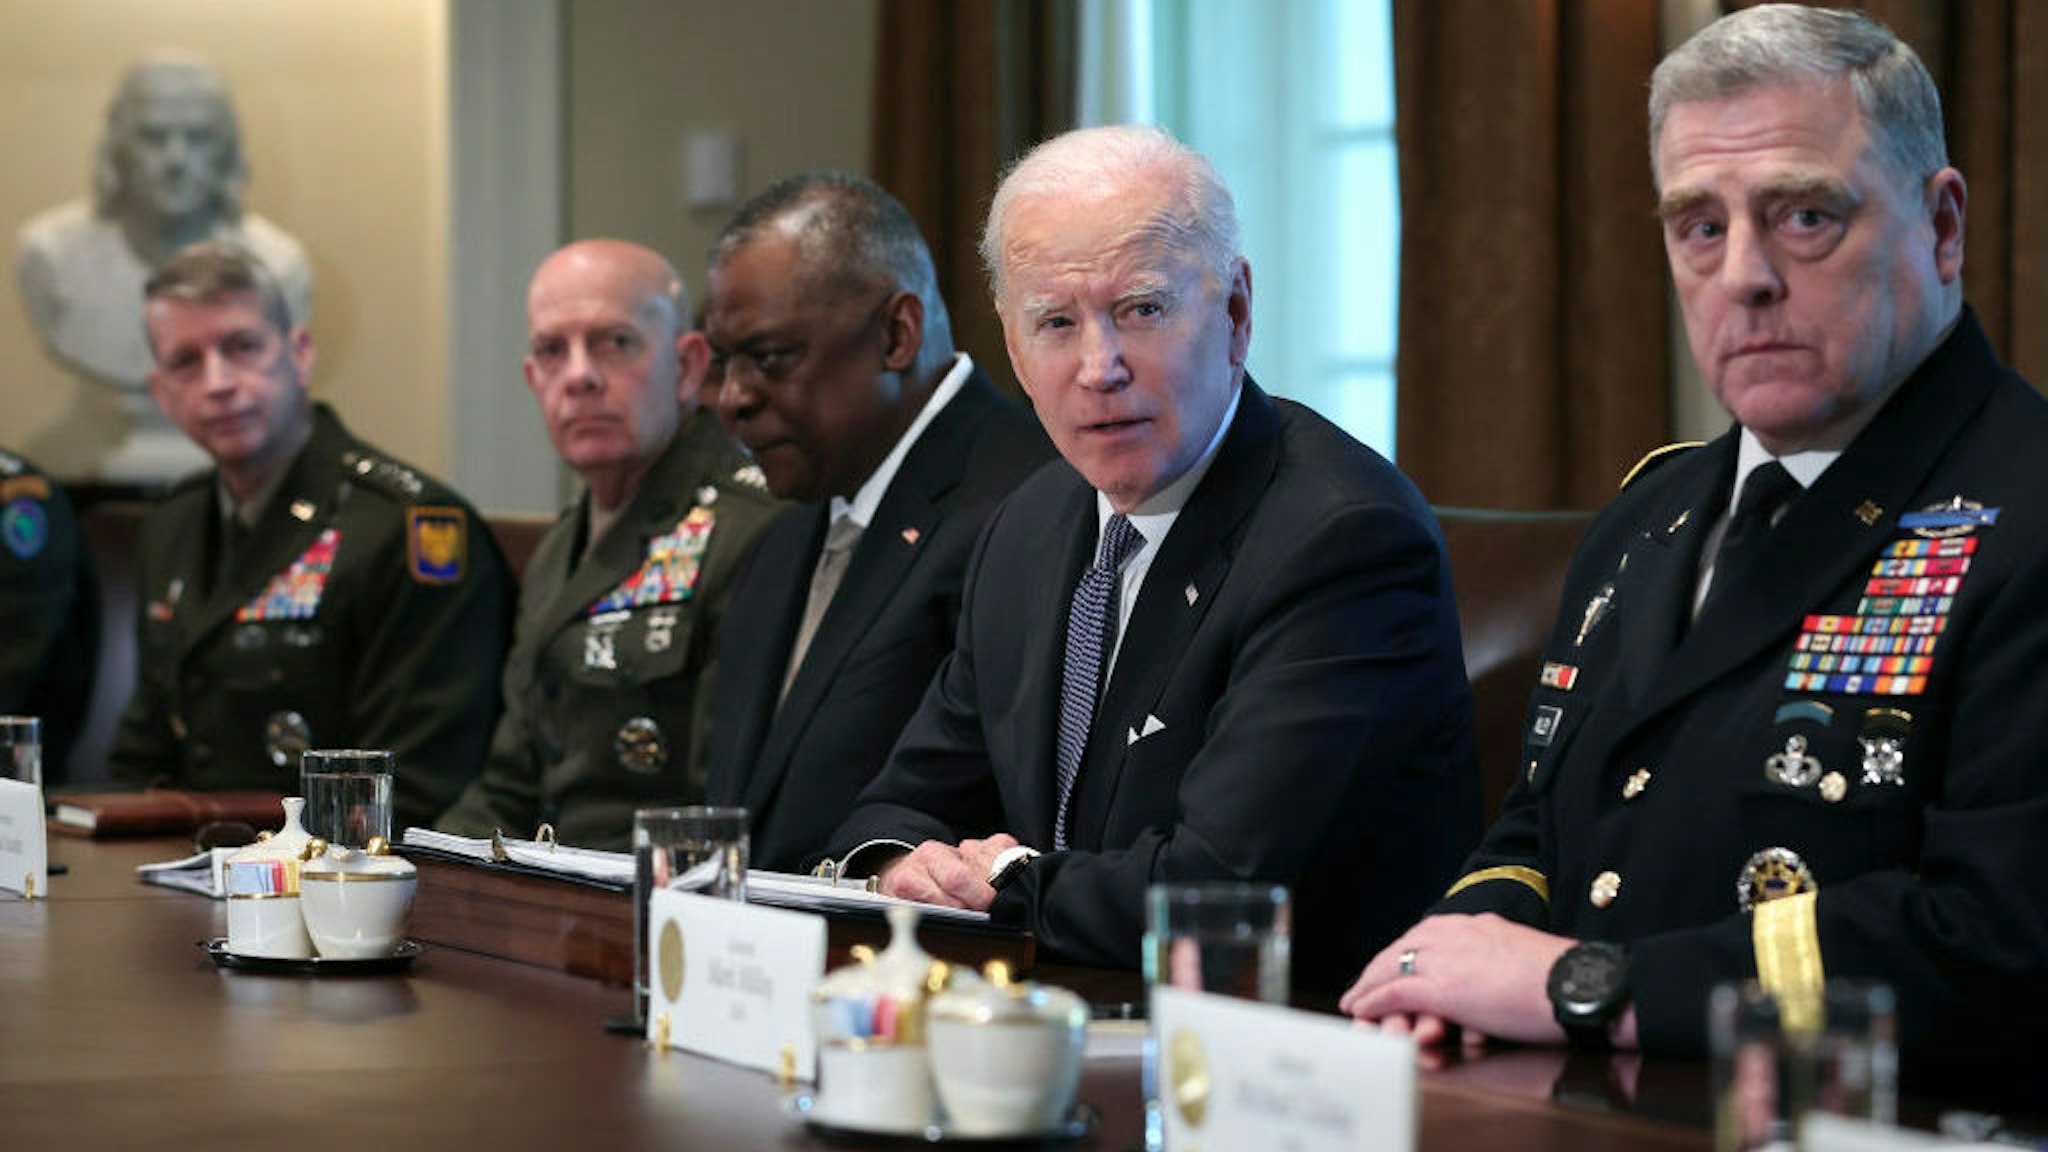 WASHINGTON, DC - APRIL 20: U.S. President Joe Biden meets with Secretary of Defense Lloyd Austin (3rd L), Chairman of the Joint Chiefs of Staff Gen. Mark Milley (R), members of the Joint Chiefs of Staff, and combatant commanders in the Cabinet Room of the White House April 20, 2022 in Washington, DC. Biden discussed the current situation in Ukraine with military leaders during the meeting. (Photo by Win McNamee/Getty Images)